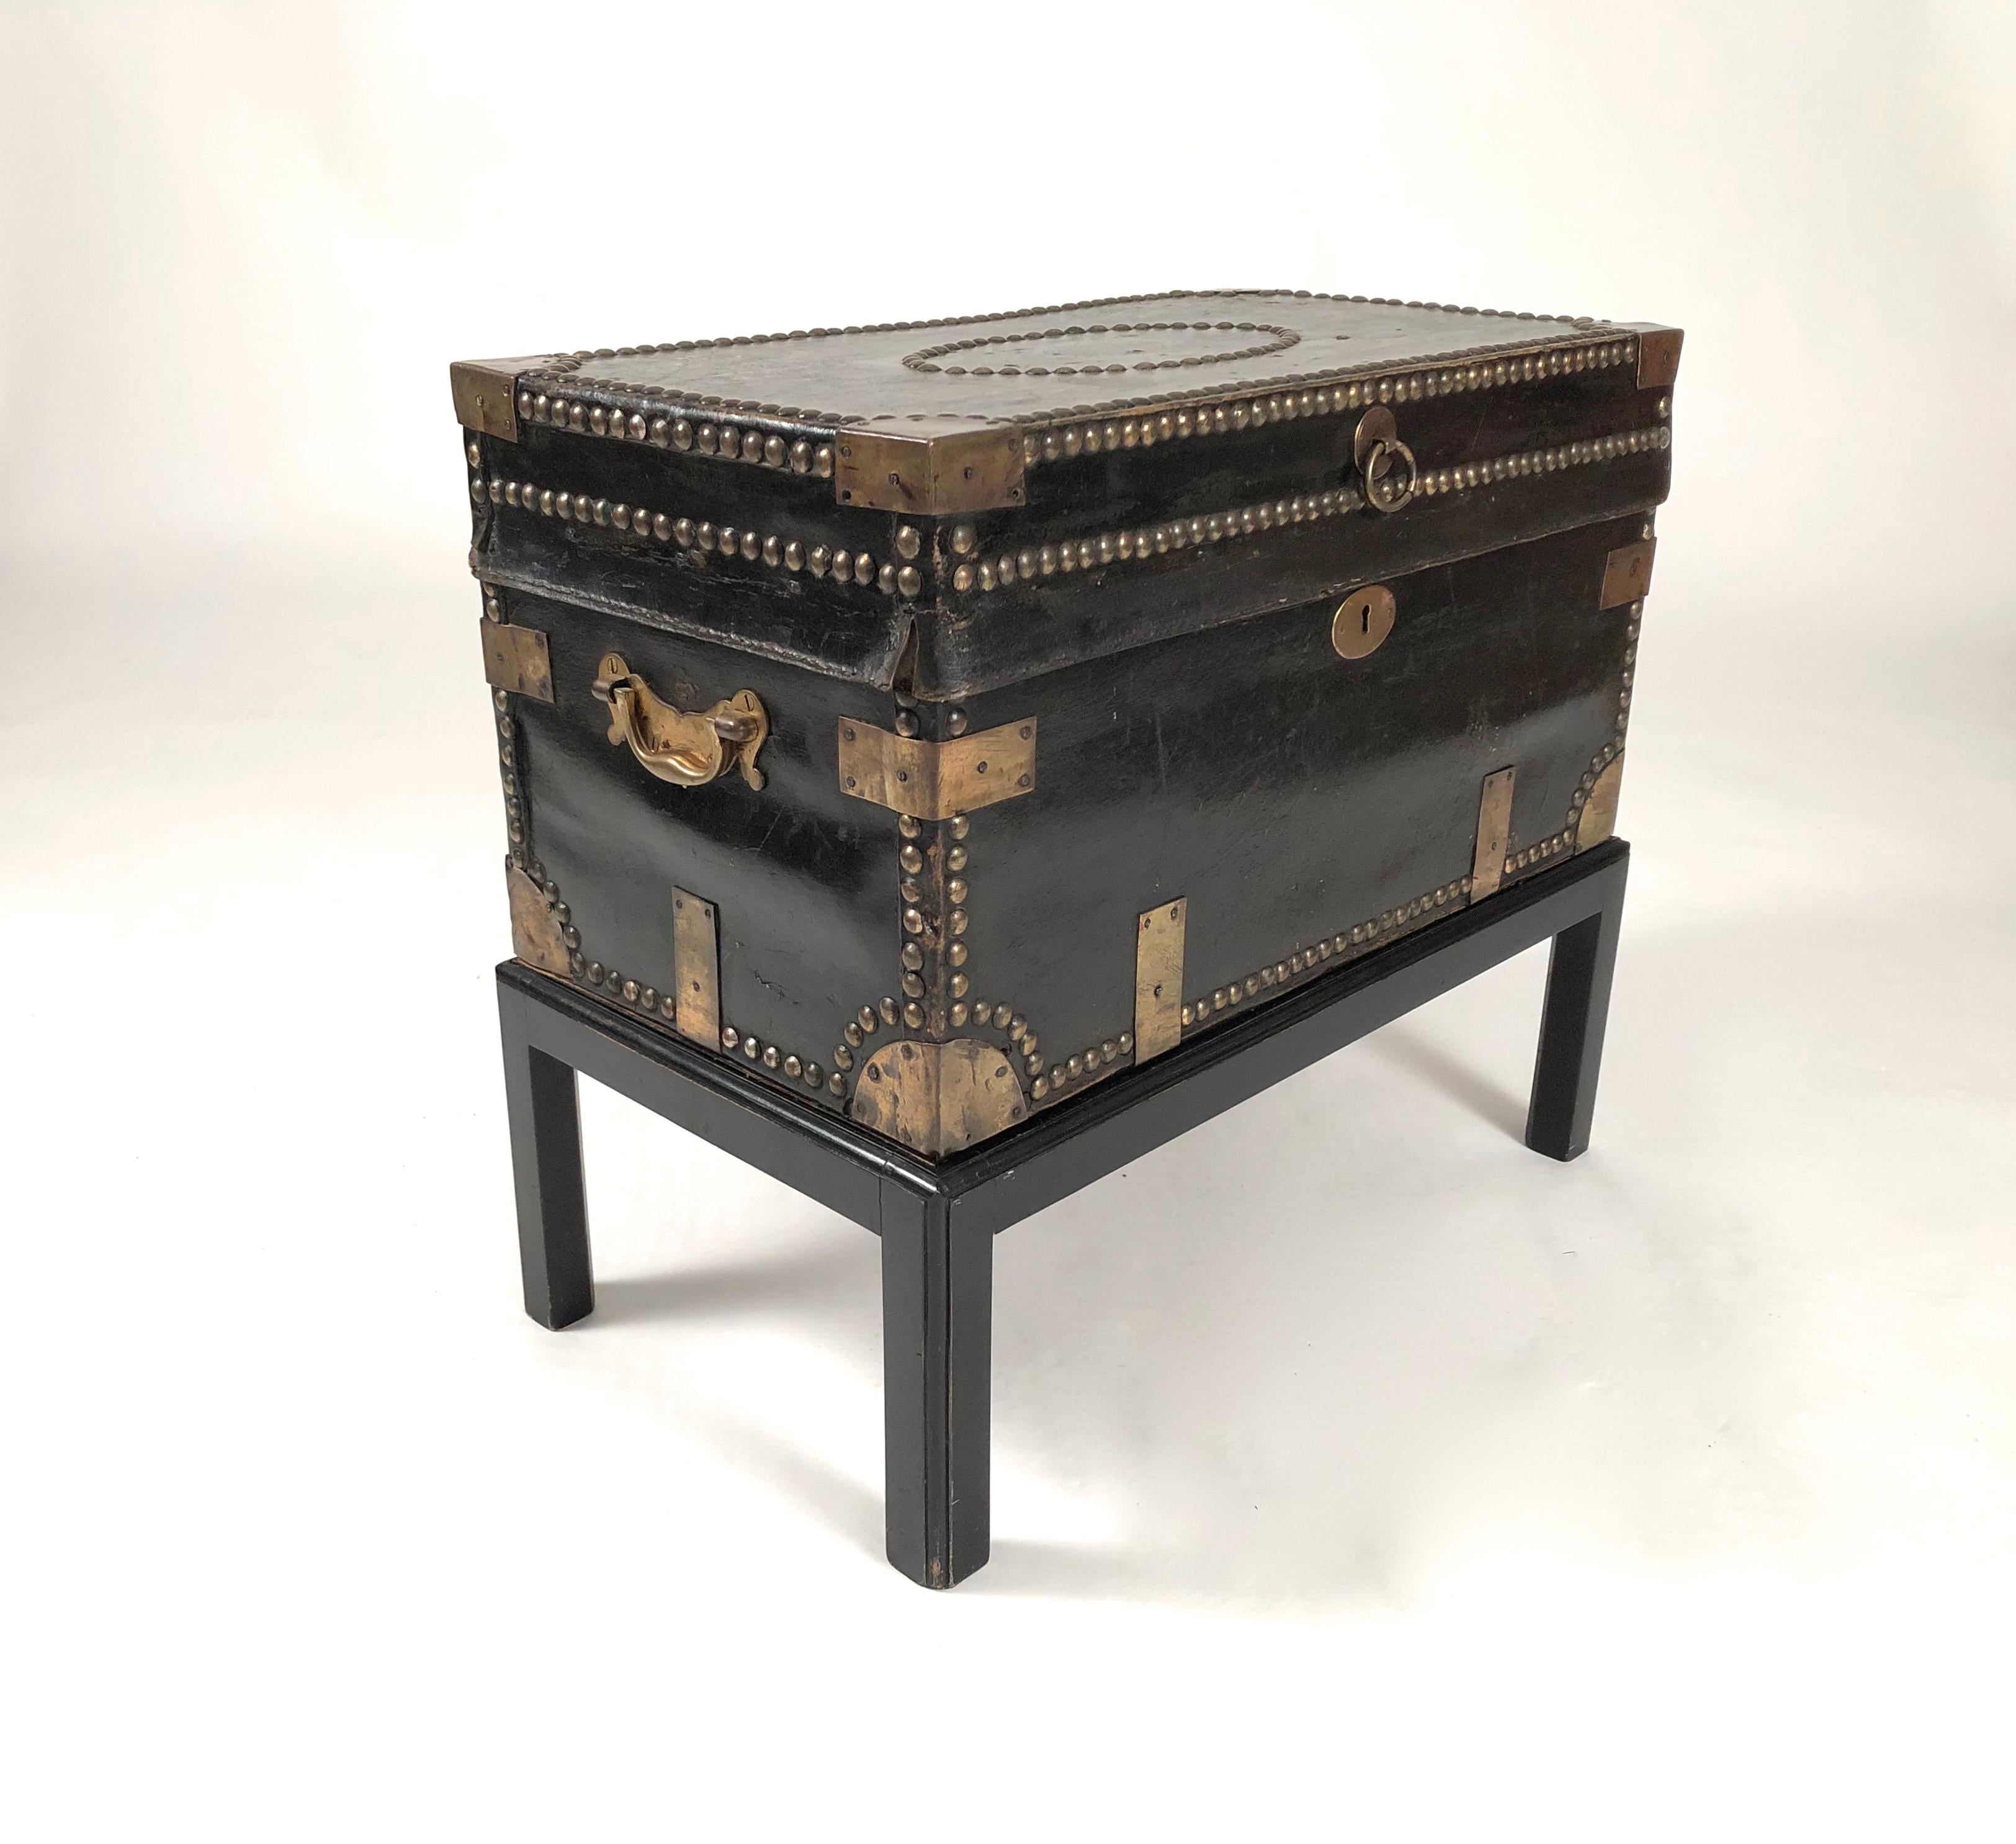 An antique brass stud decorated sea captain's chest on stand, circa 1810-1820, ideal as a side table. The interior is lined with its original coral colored printed wallpaper. The Stand was custom made for it and is black painted wood. Perfect as a